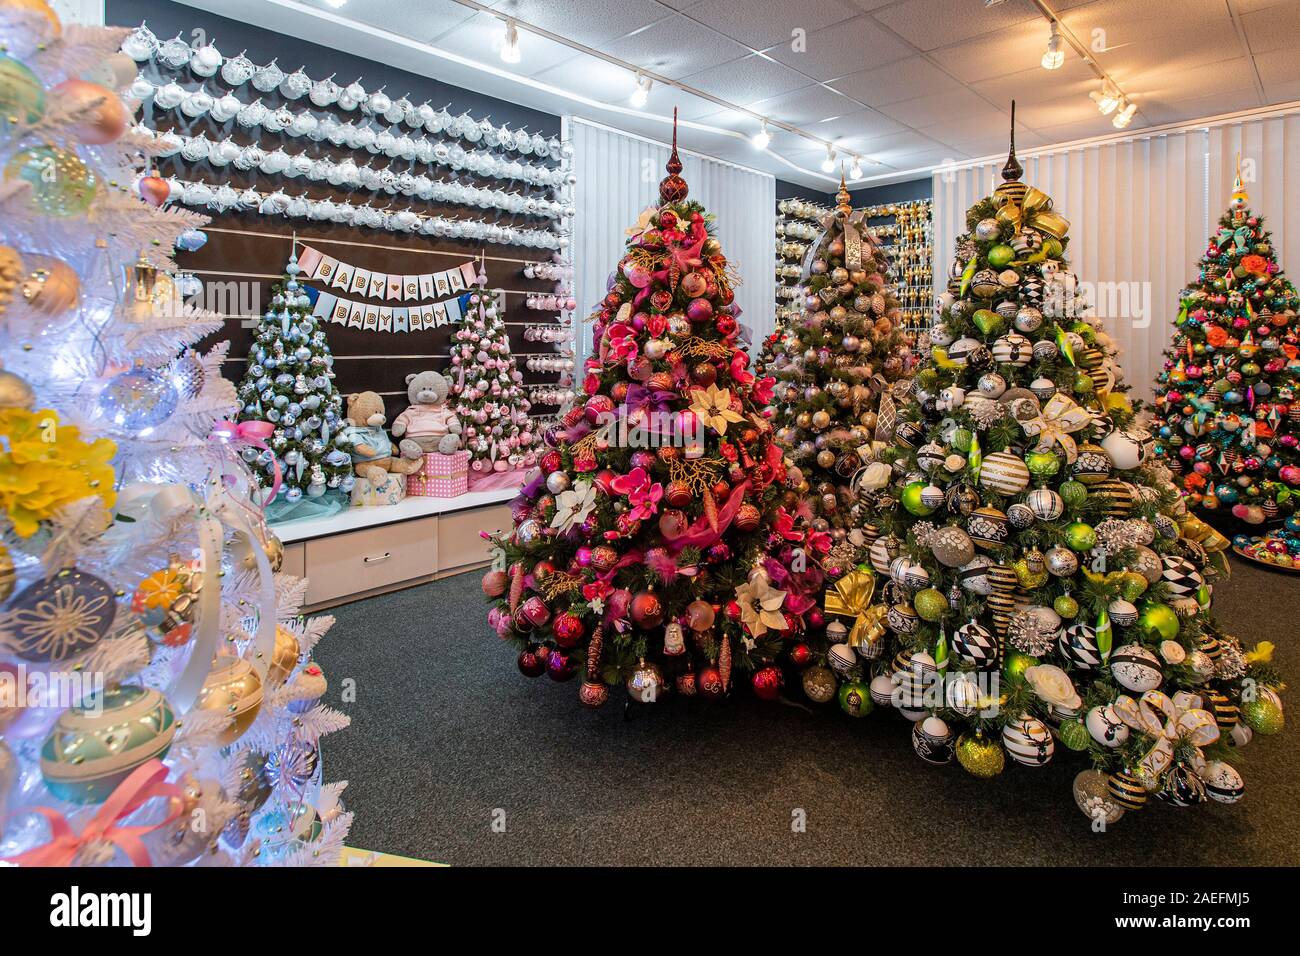 Worker completes glass ornaments in Vanocni ozdoby (Christmas ornaments)  factory, Dvur Kralove nad Labem, on Tuesday, December 3, 2019. Vanocni  ozdoby is the biggest manufacturer of hand-blown and painted glass  Christmas tree